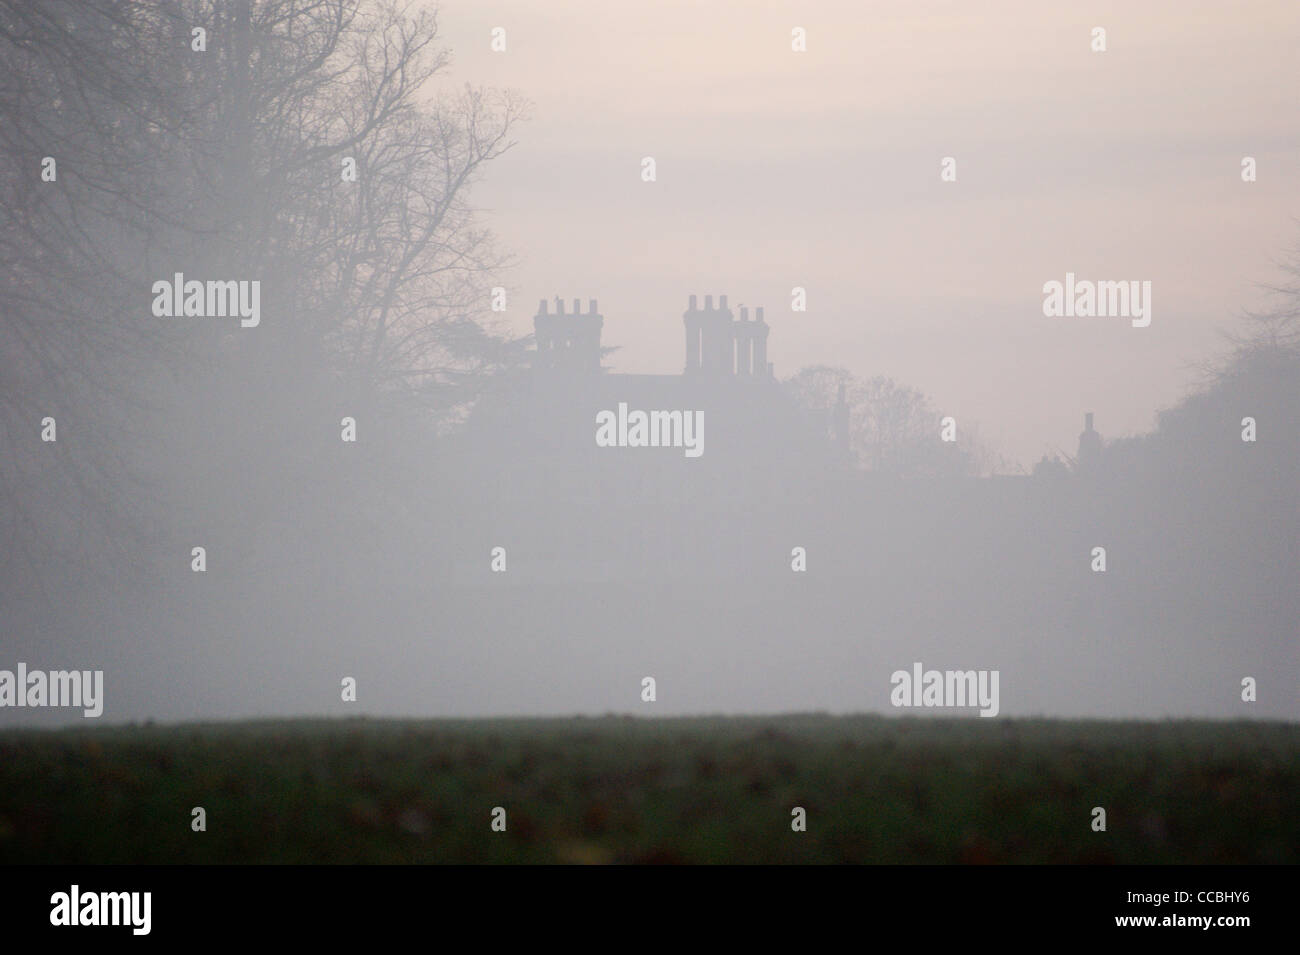 jacobean-mansion-forty-hall-in-evening-f